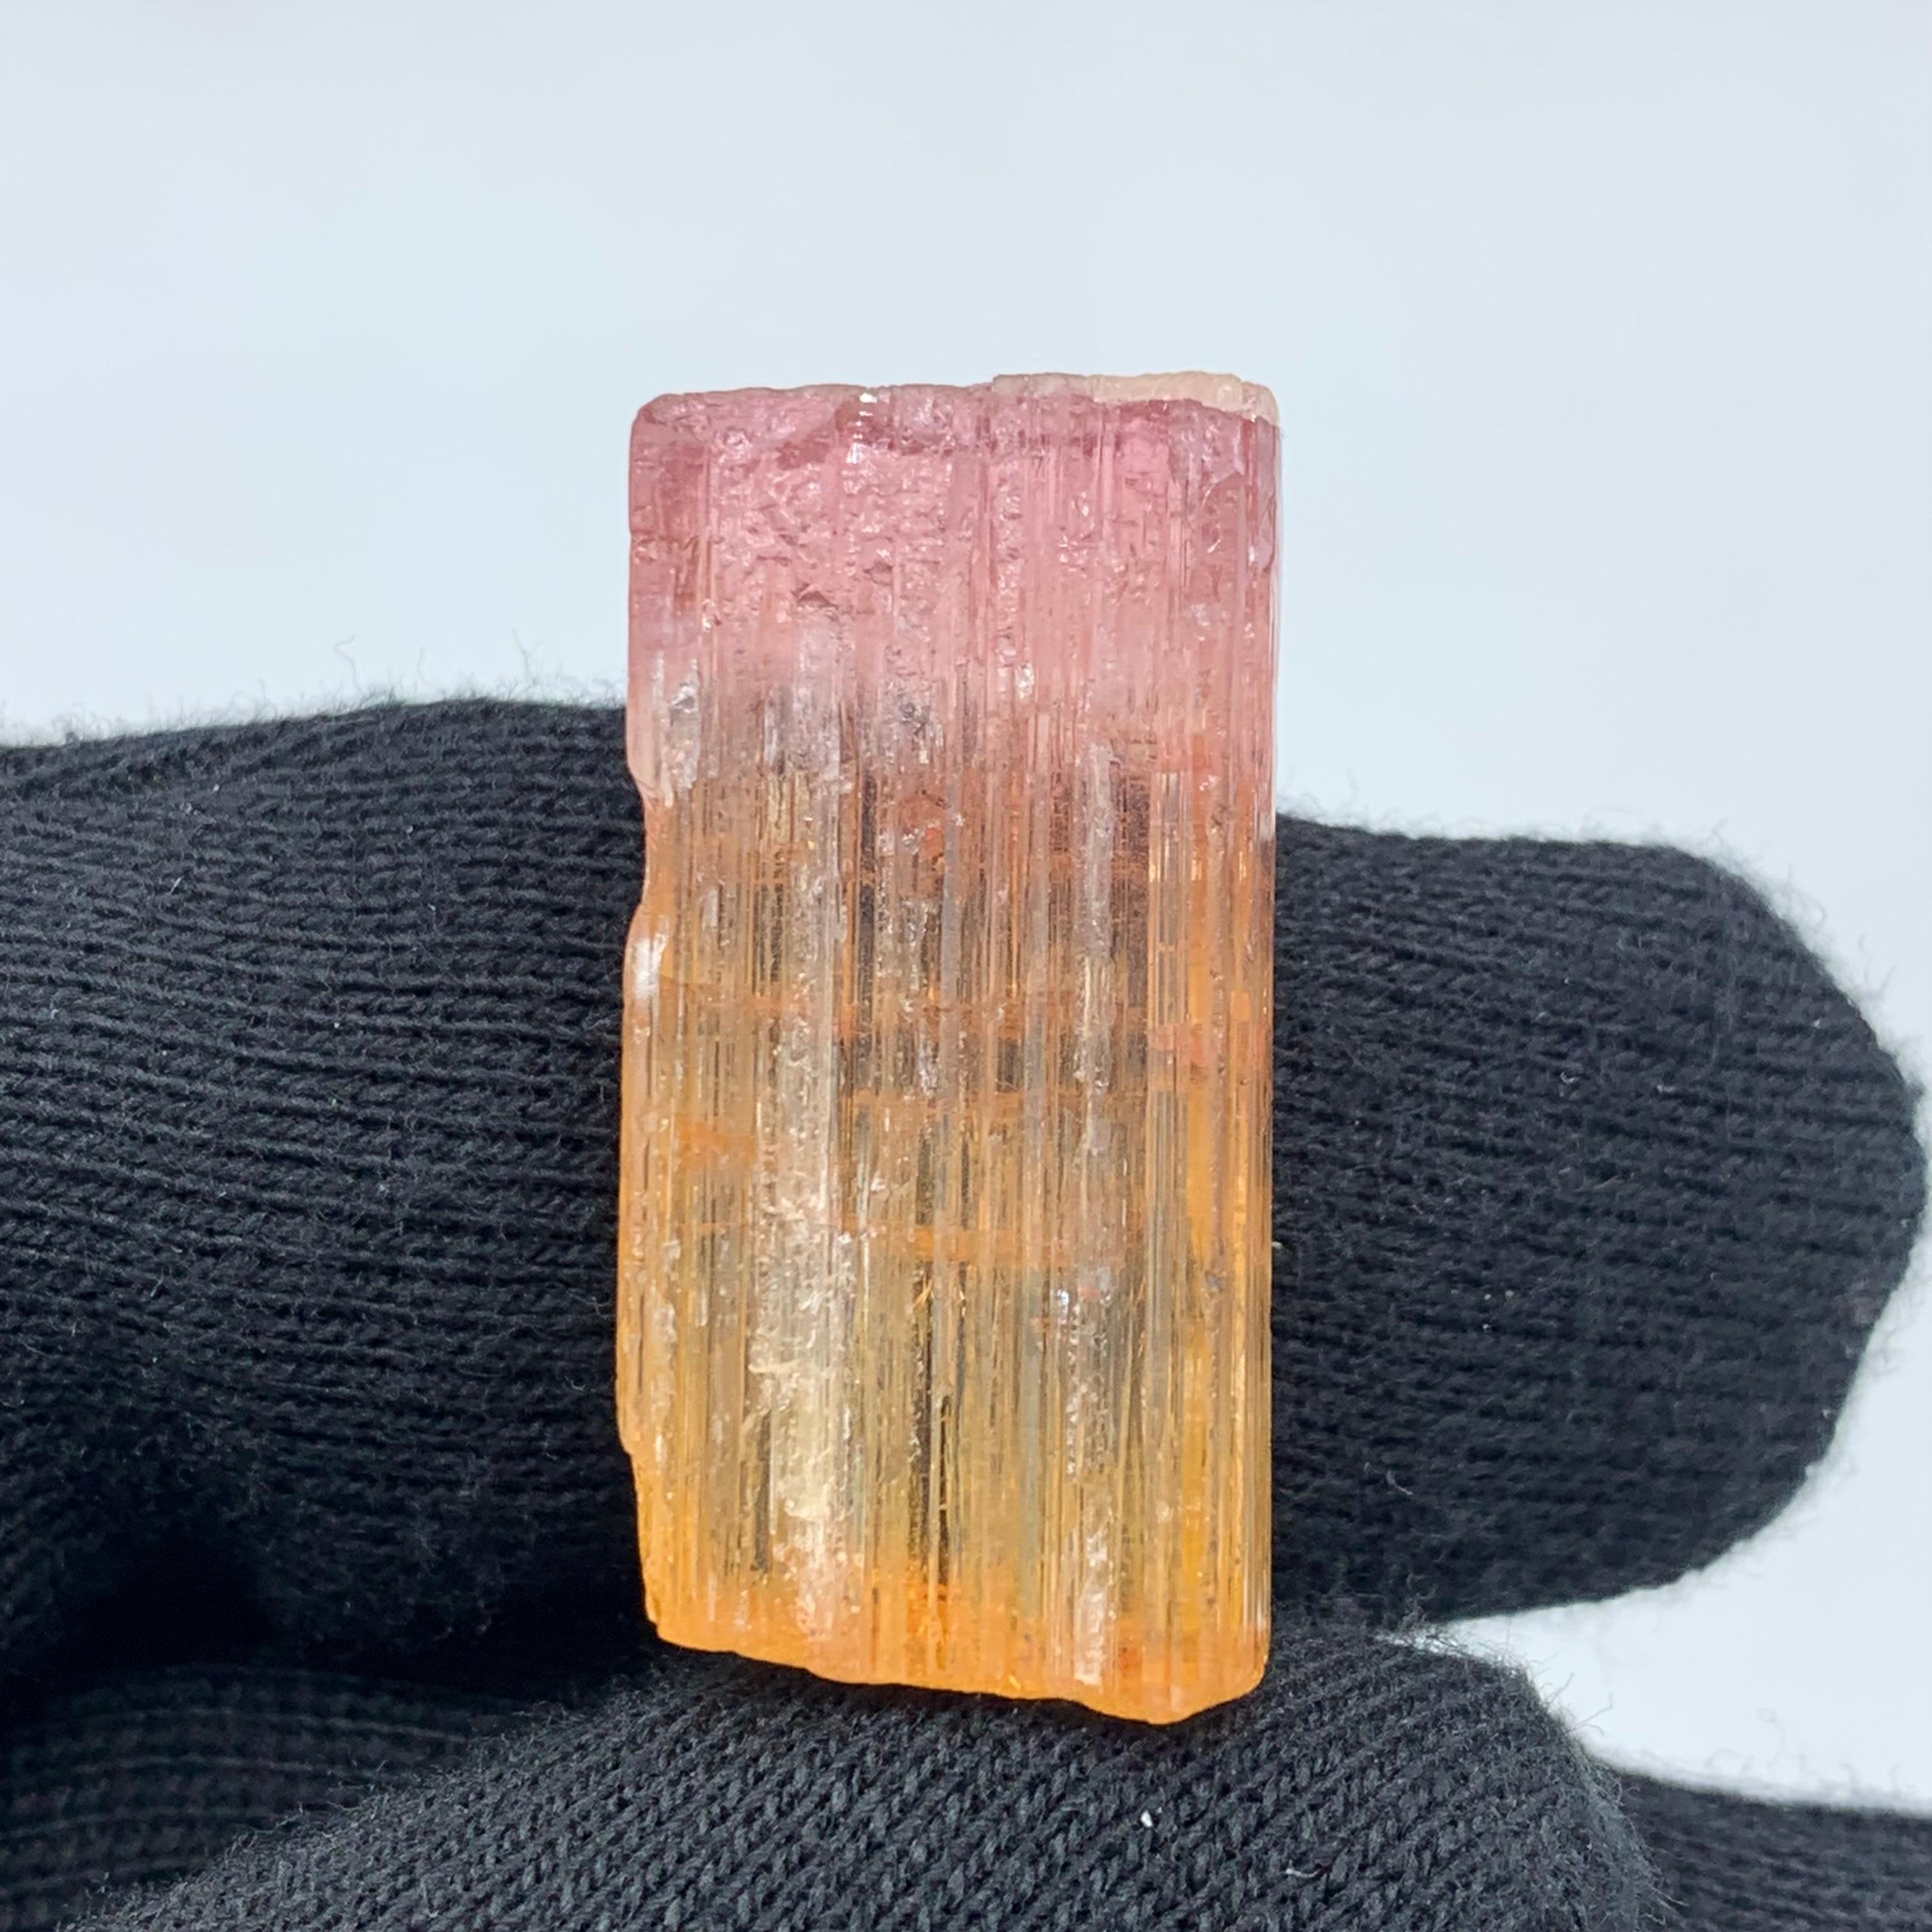 48 Carat Amazing Bi Color Tourmaline Crystal From Paprook Mine, Afghanistan For Sale 6